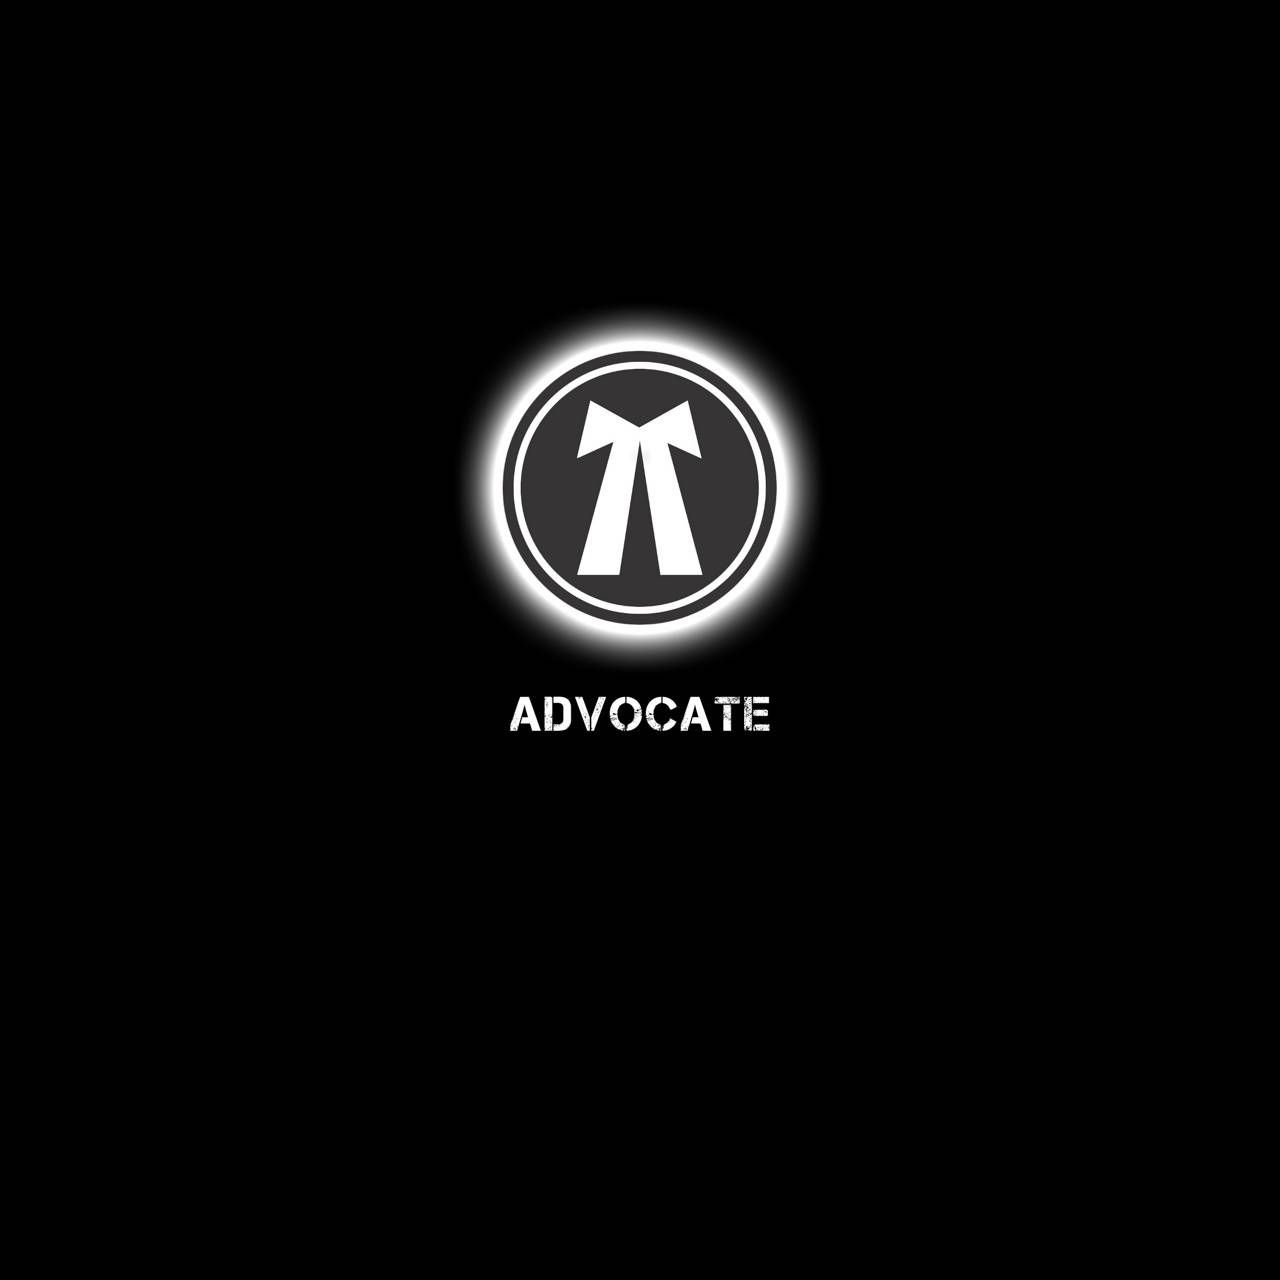 Advocate Logo Wallpapers - Wallpaper Cave